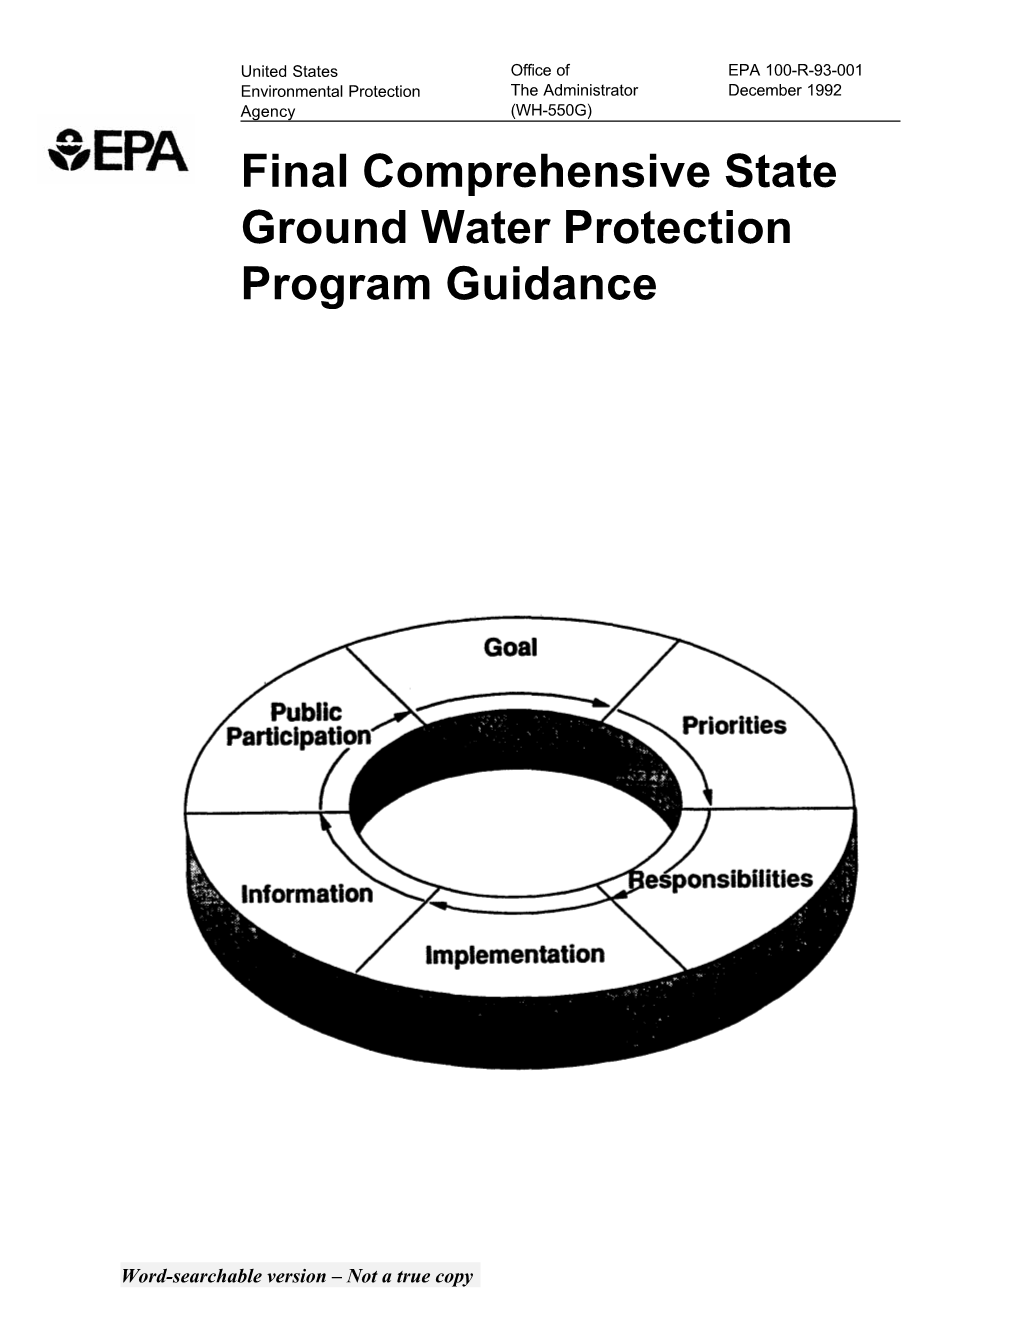 Final Comprehensive State Ground Water Protection Program Guidance